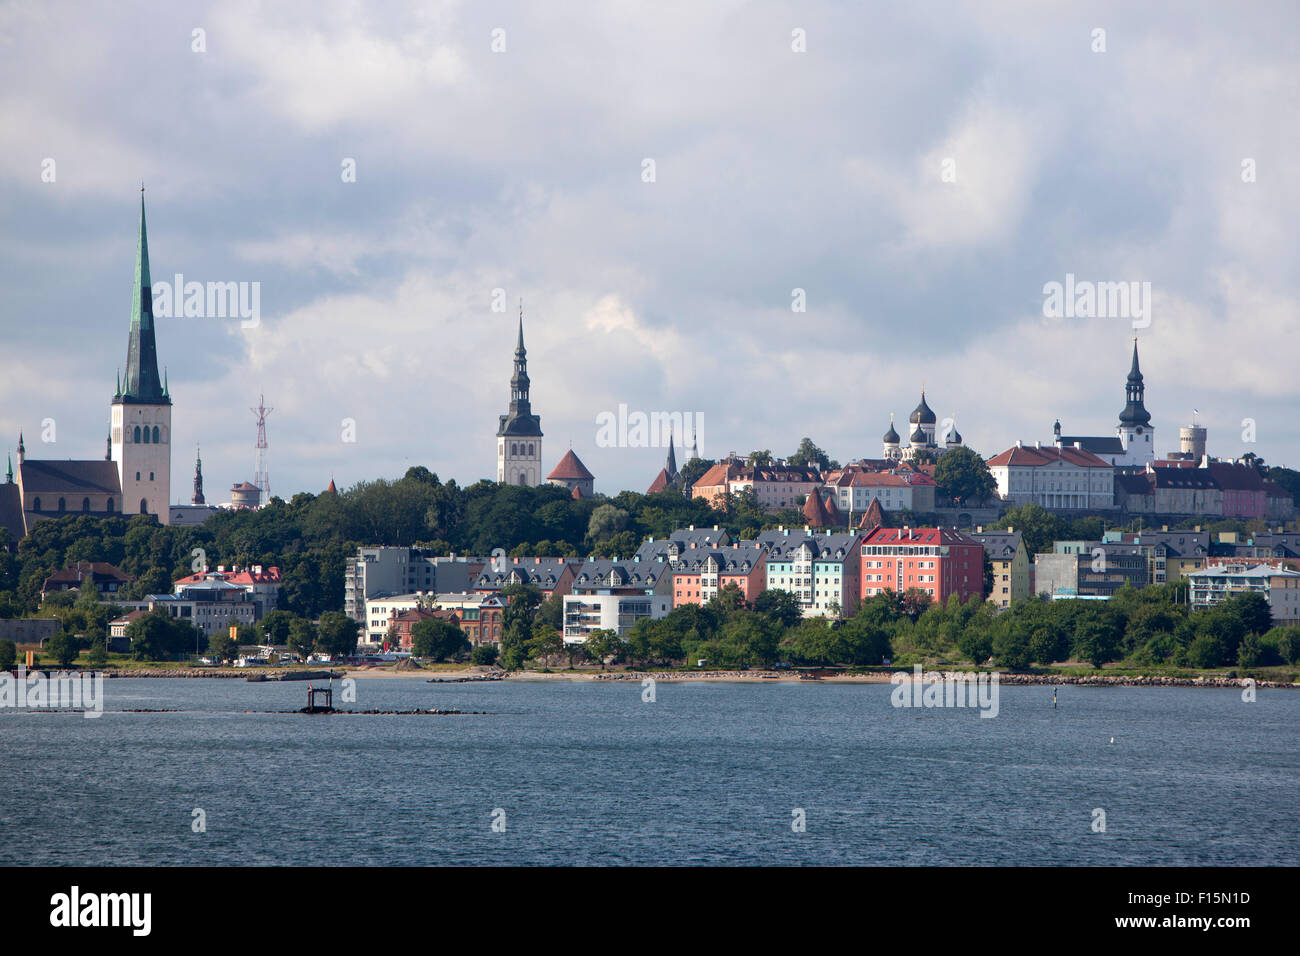 Tallinn Estonia showing a view from the sea the Old Town City Centre and St. Olaf's Church in the Baltic Sea region Stock Photo